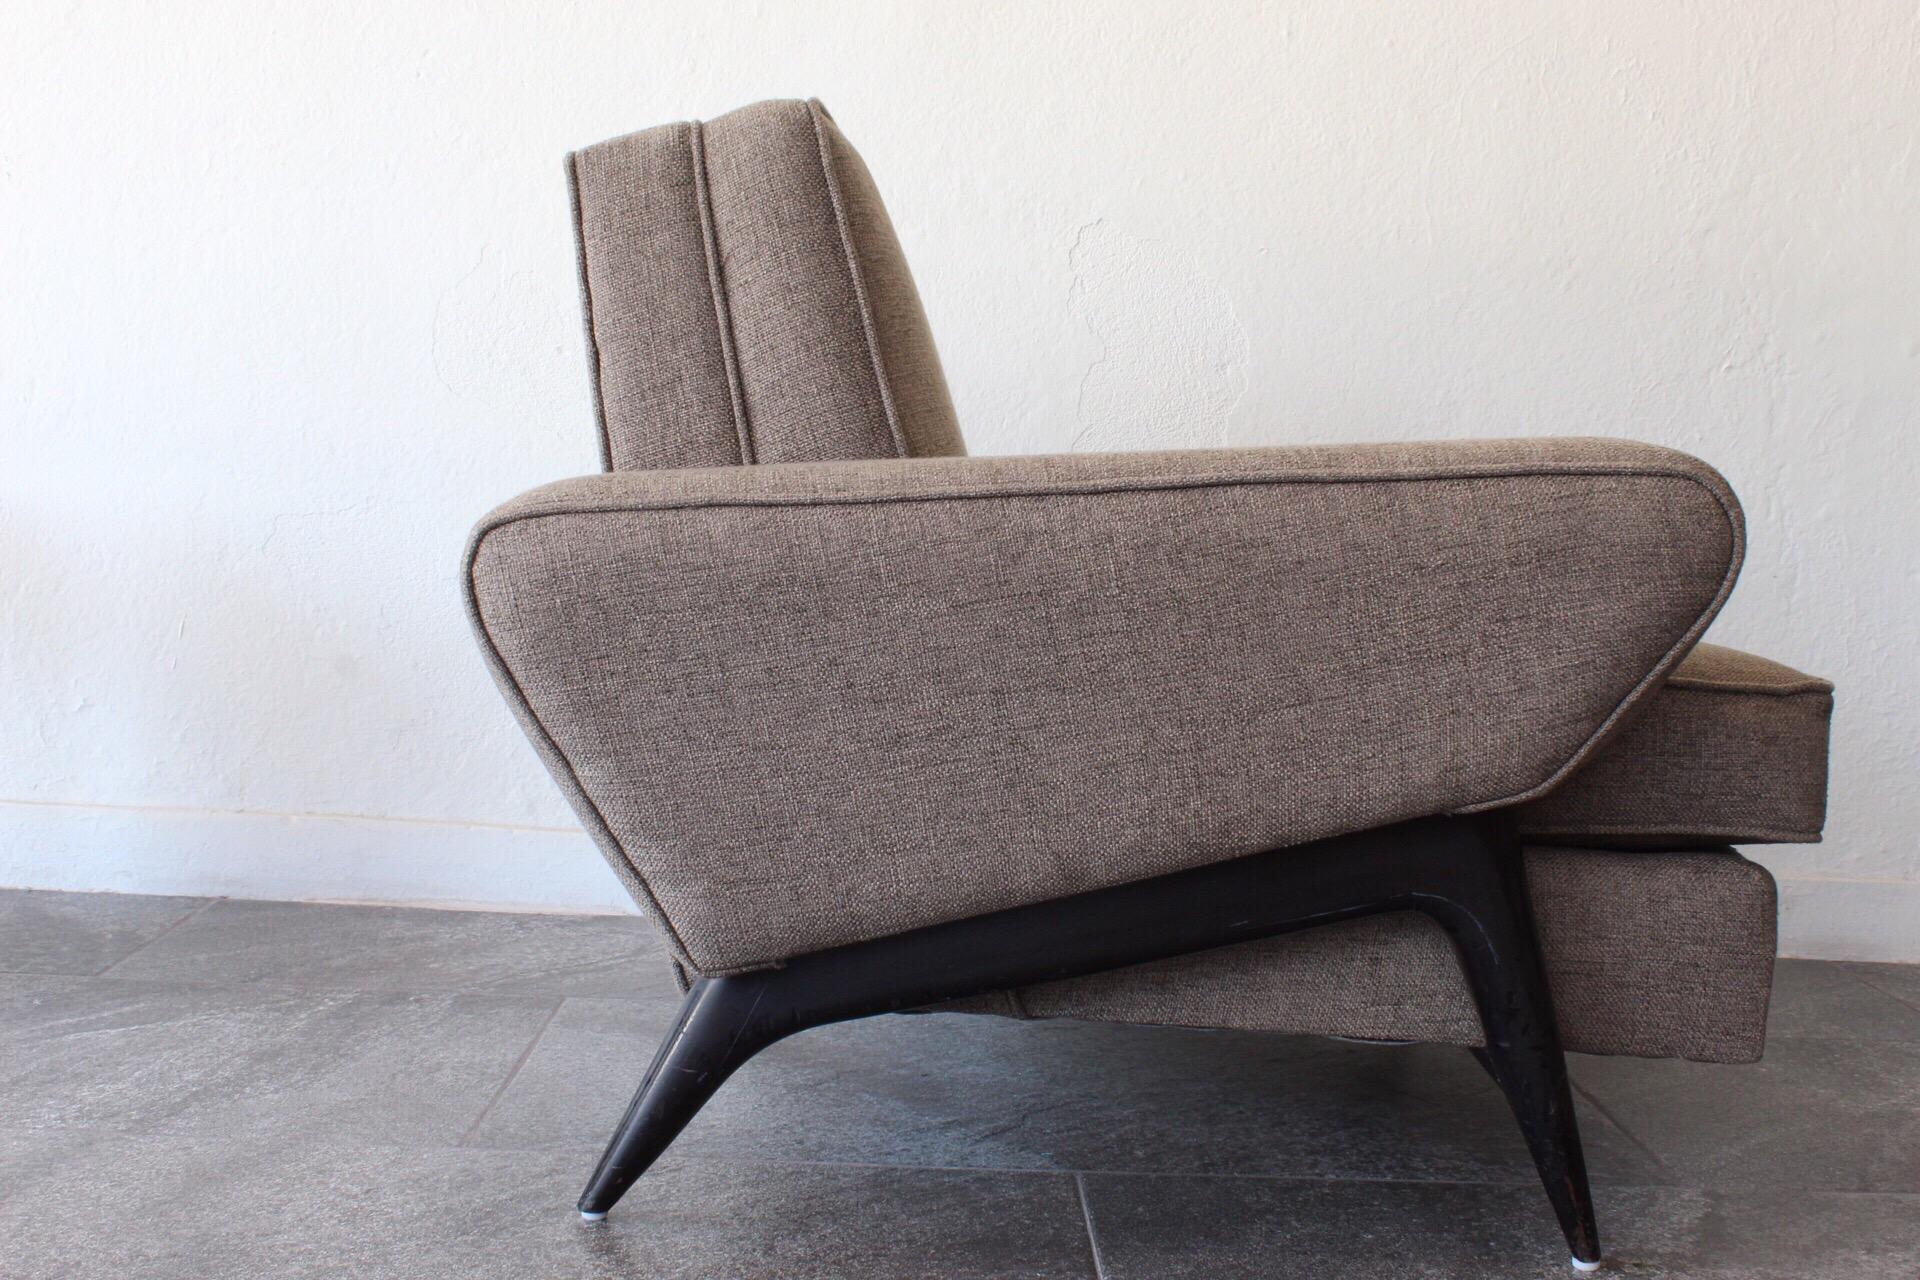 Armchair attributed to Eugenio Escudero, manufactured in the late sixties, possibly reupholstered in the nineties, the legs were not restored and show details of use., Escudero is cataloged one of the greatest icons of Mexican modernism.